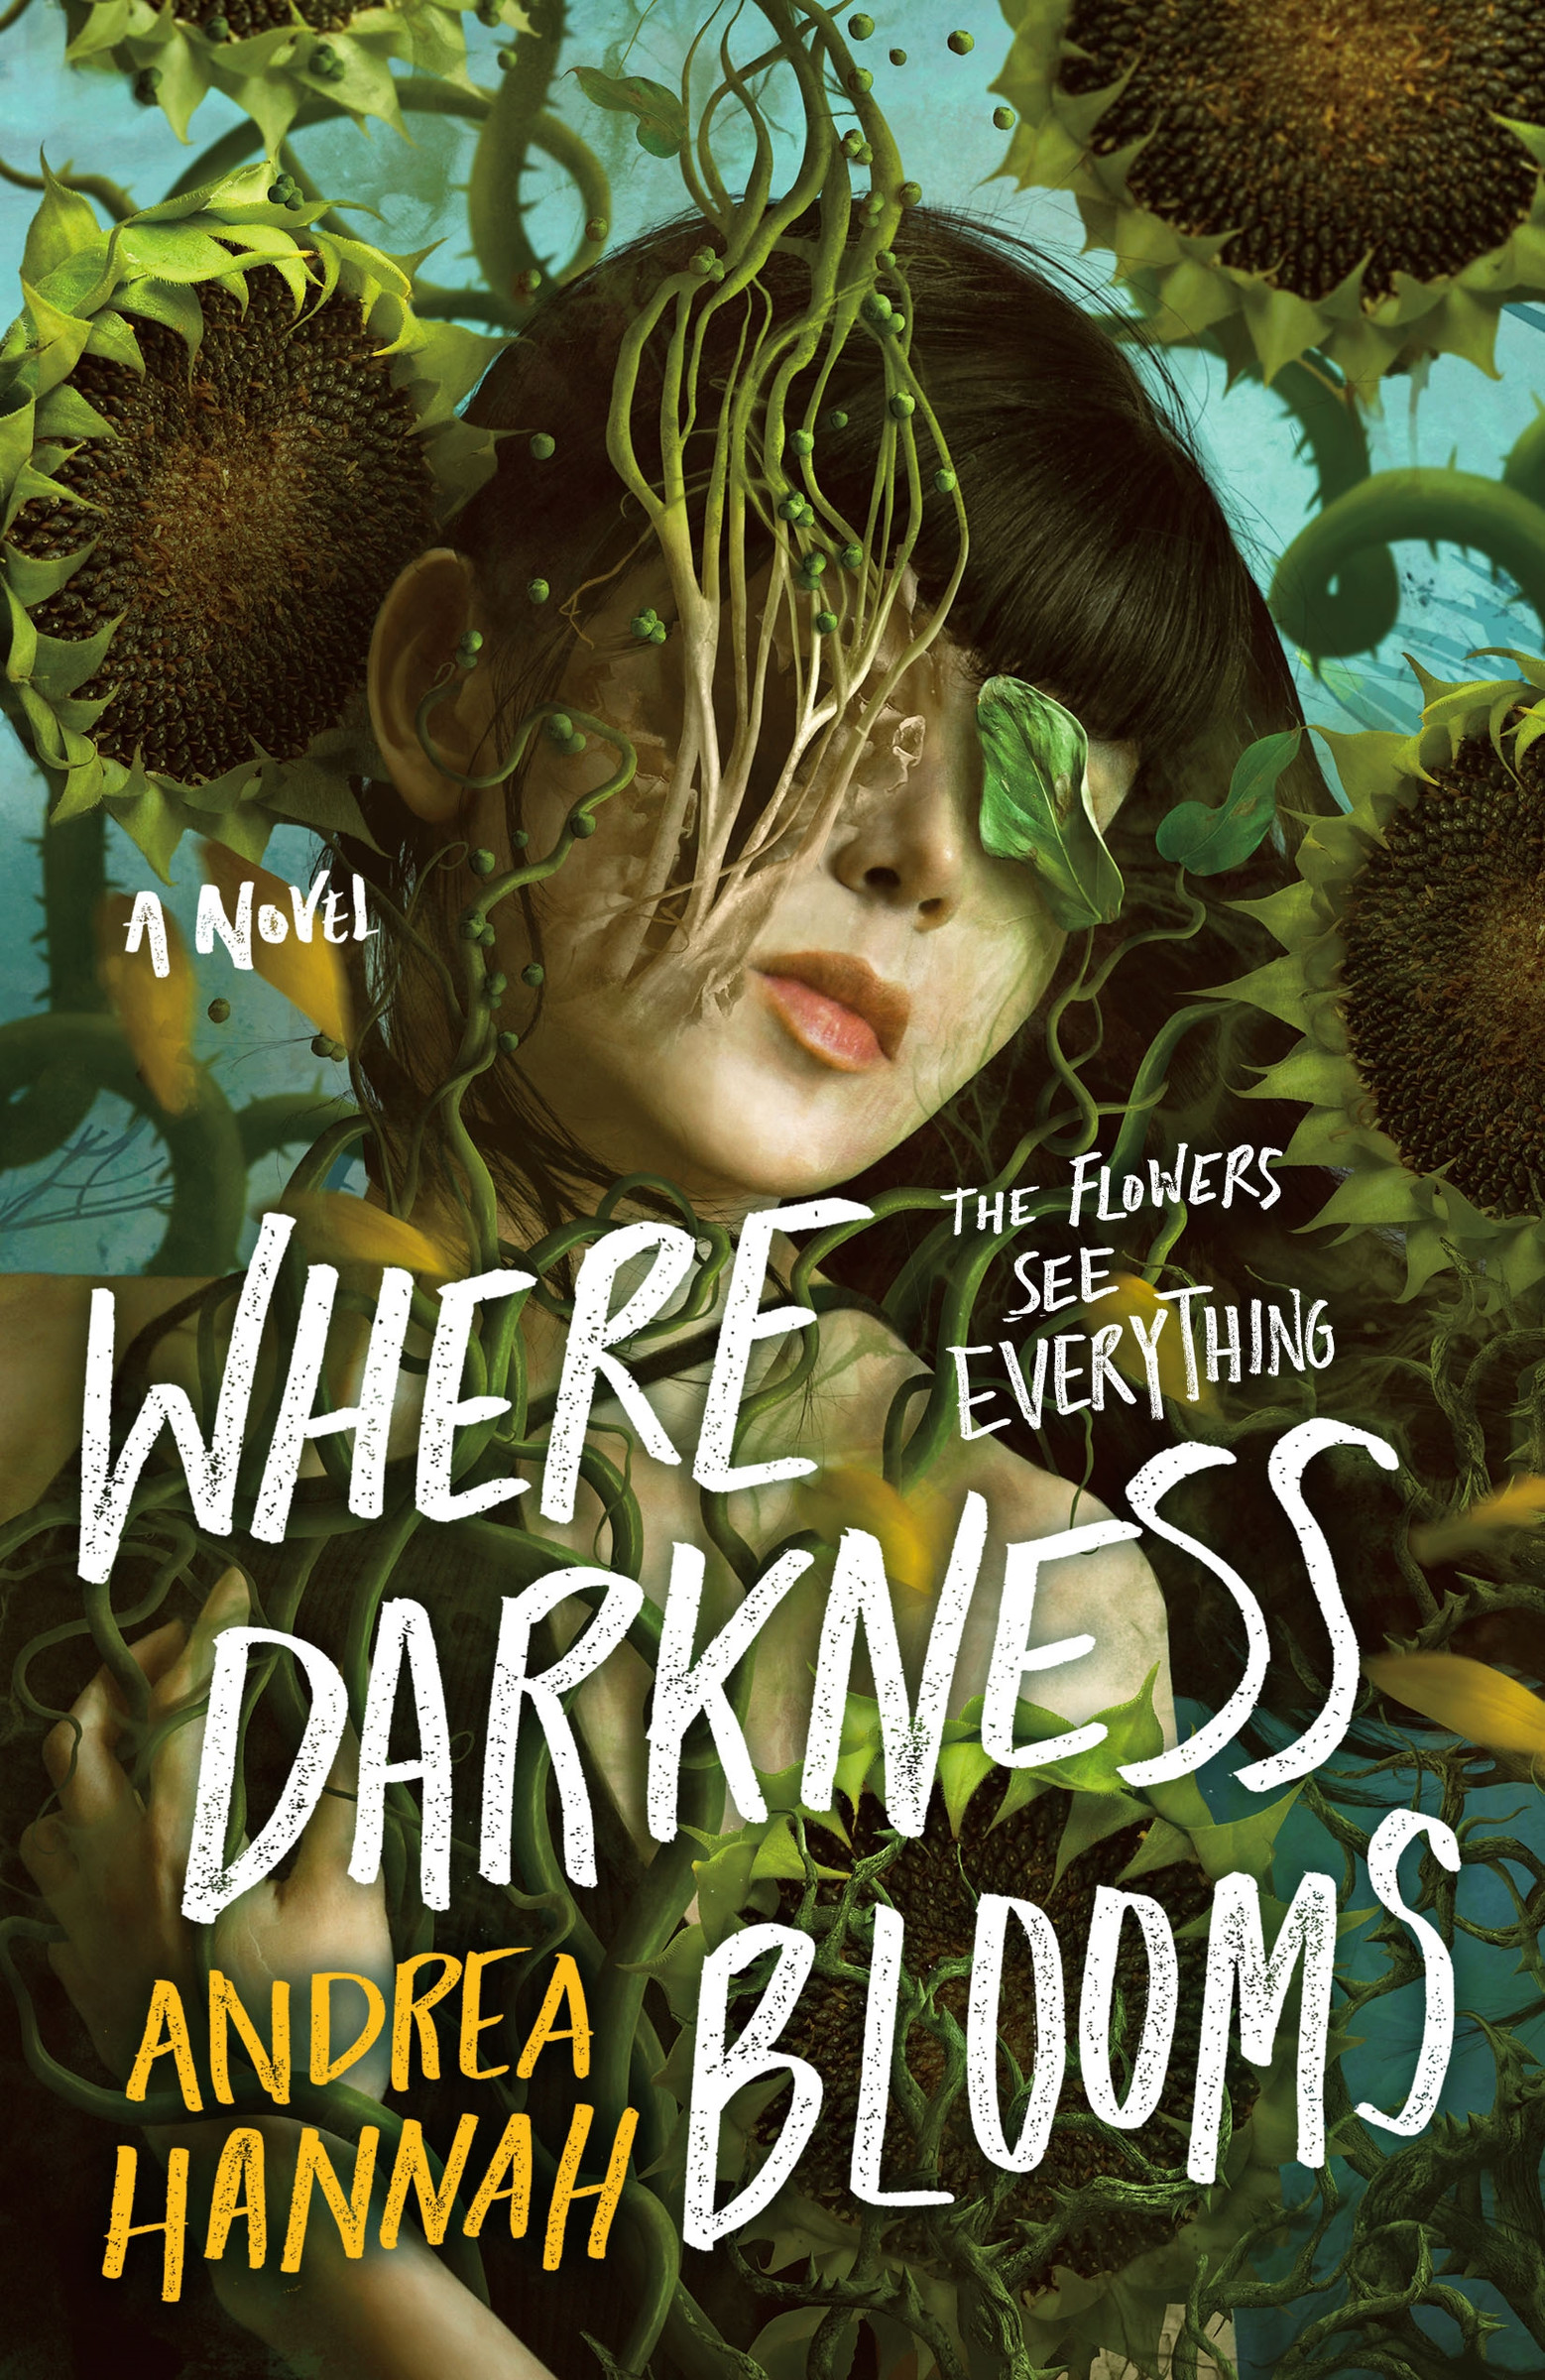 Where Darkness Blooms : A Novel | Young adult